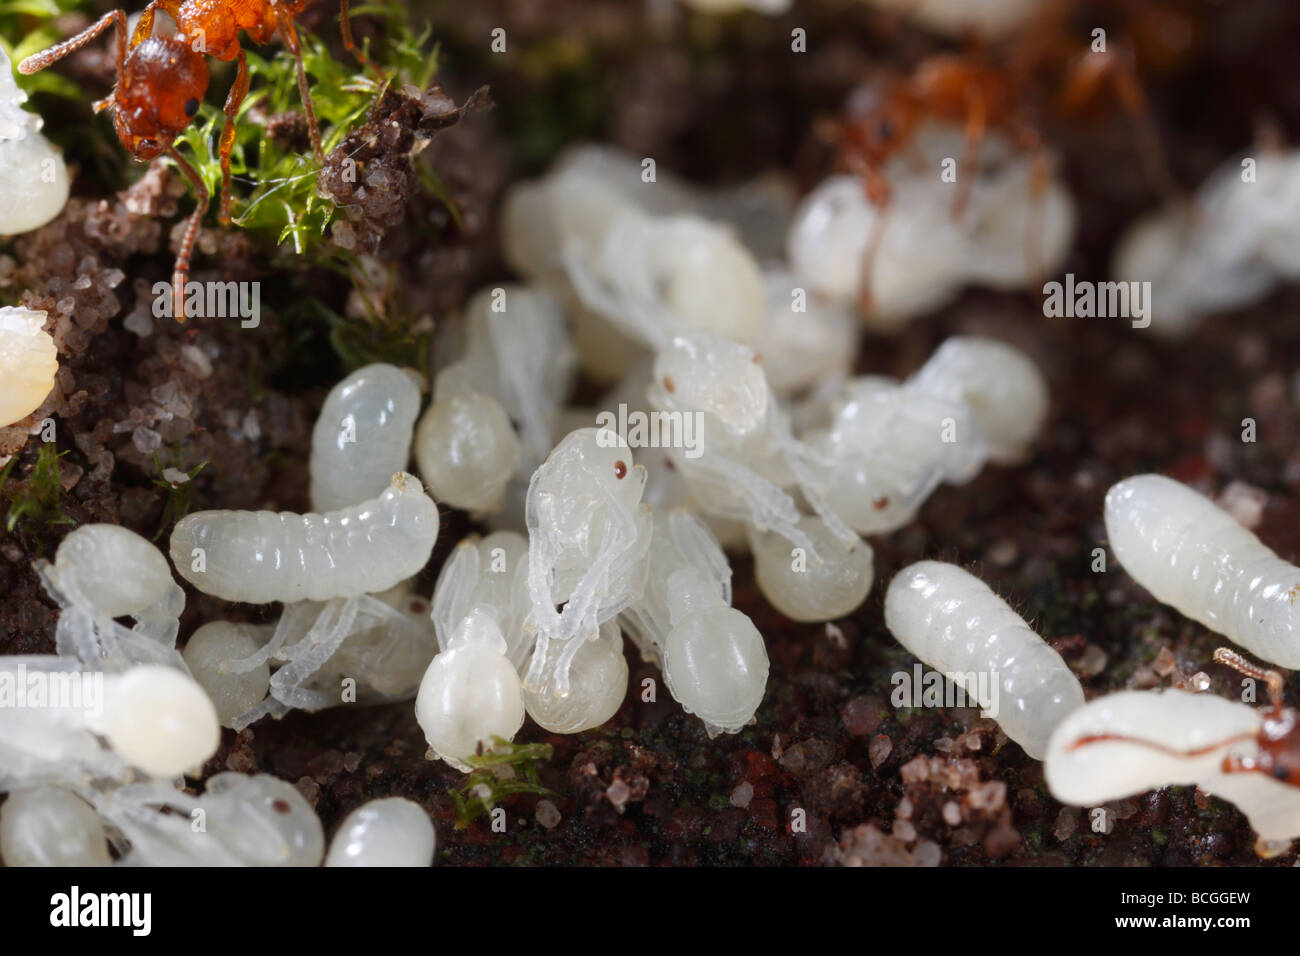 Ants of the genus Myrmica bringing their larvae and pupae back underground after their nest has been disturbed. Stock Photo